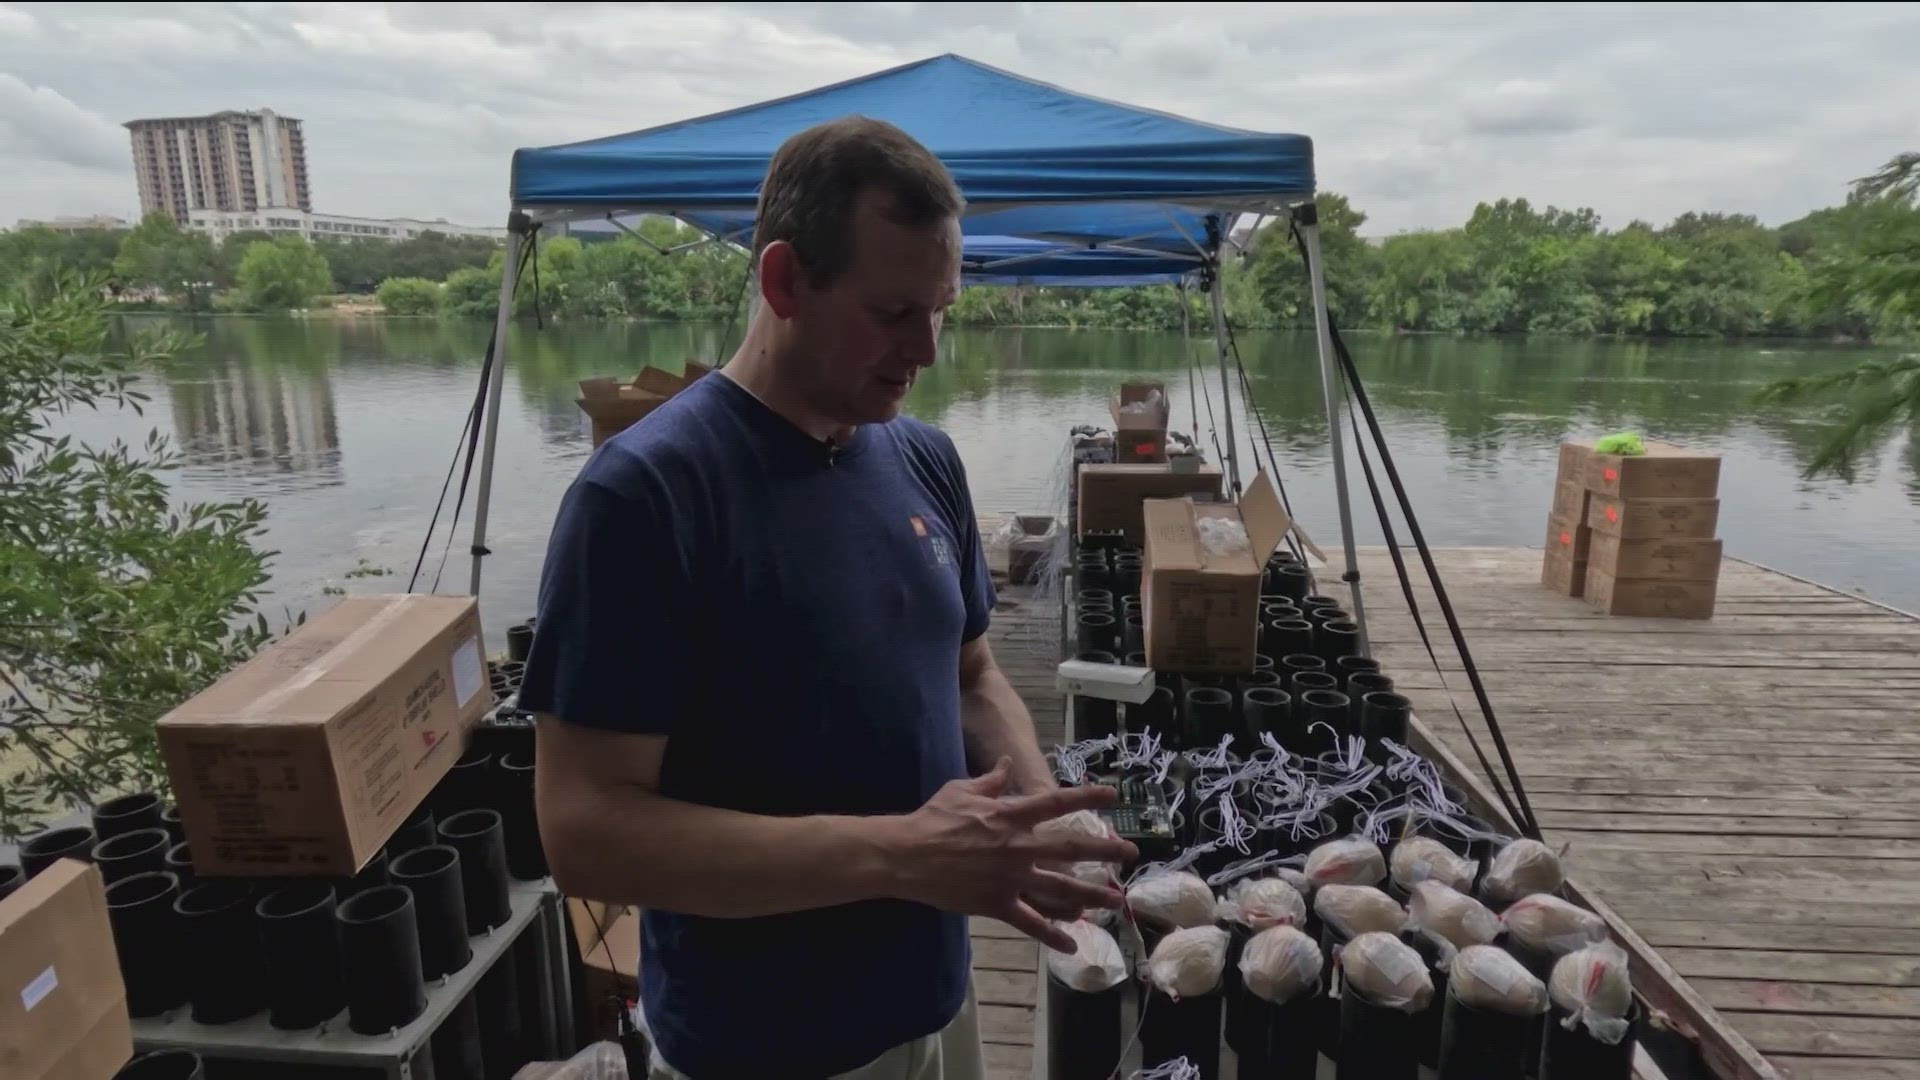 The annual fireworks show at Vic Mathias Shores starts at 8:30 p.m. KVUE got a behind-the-scenes look with the people who make it happen.